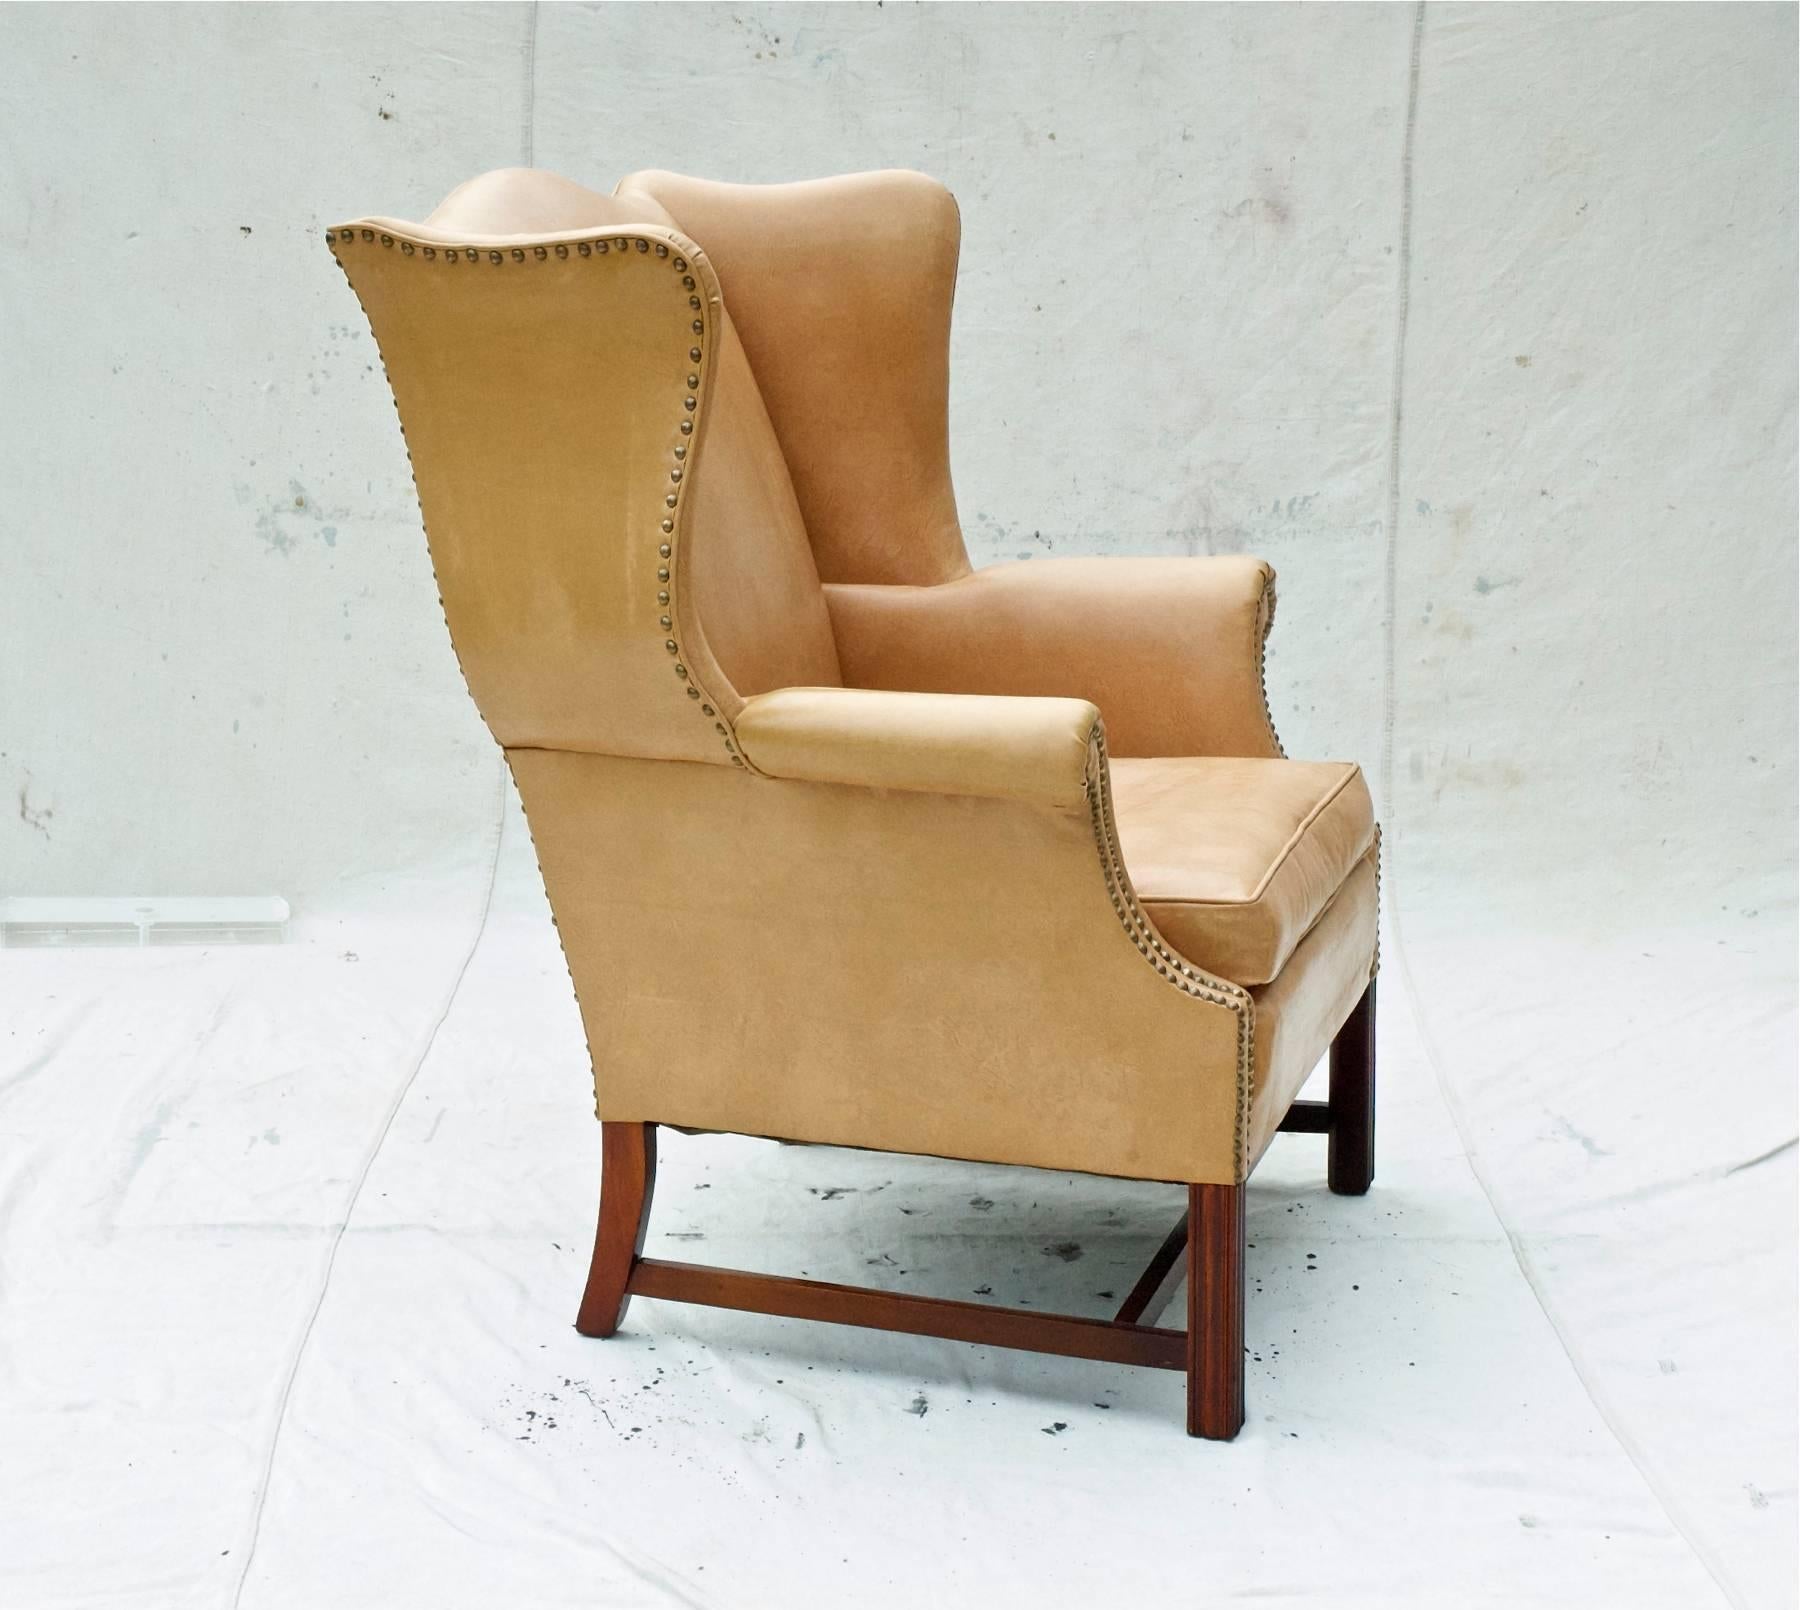 American Wingback Chair in Leather and Nailhead Trim